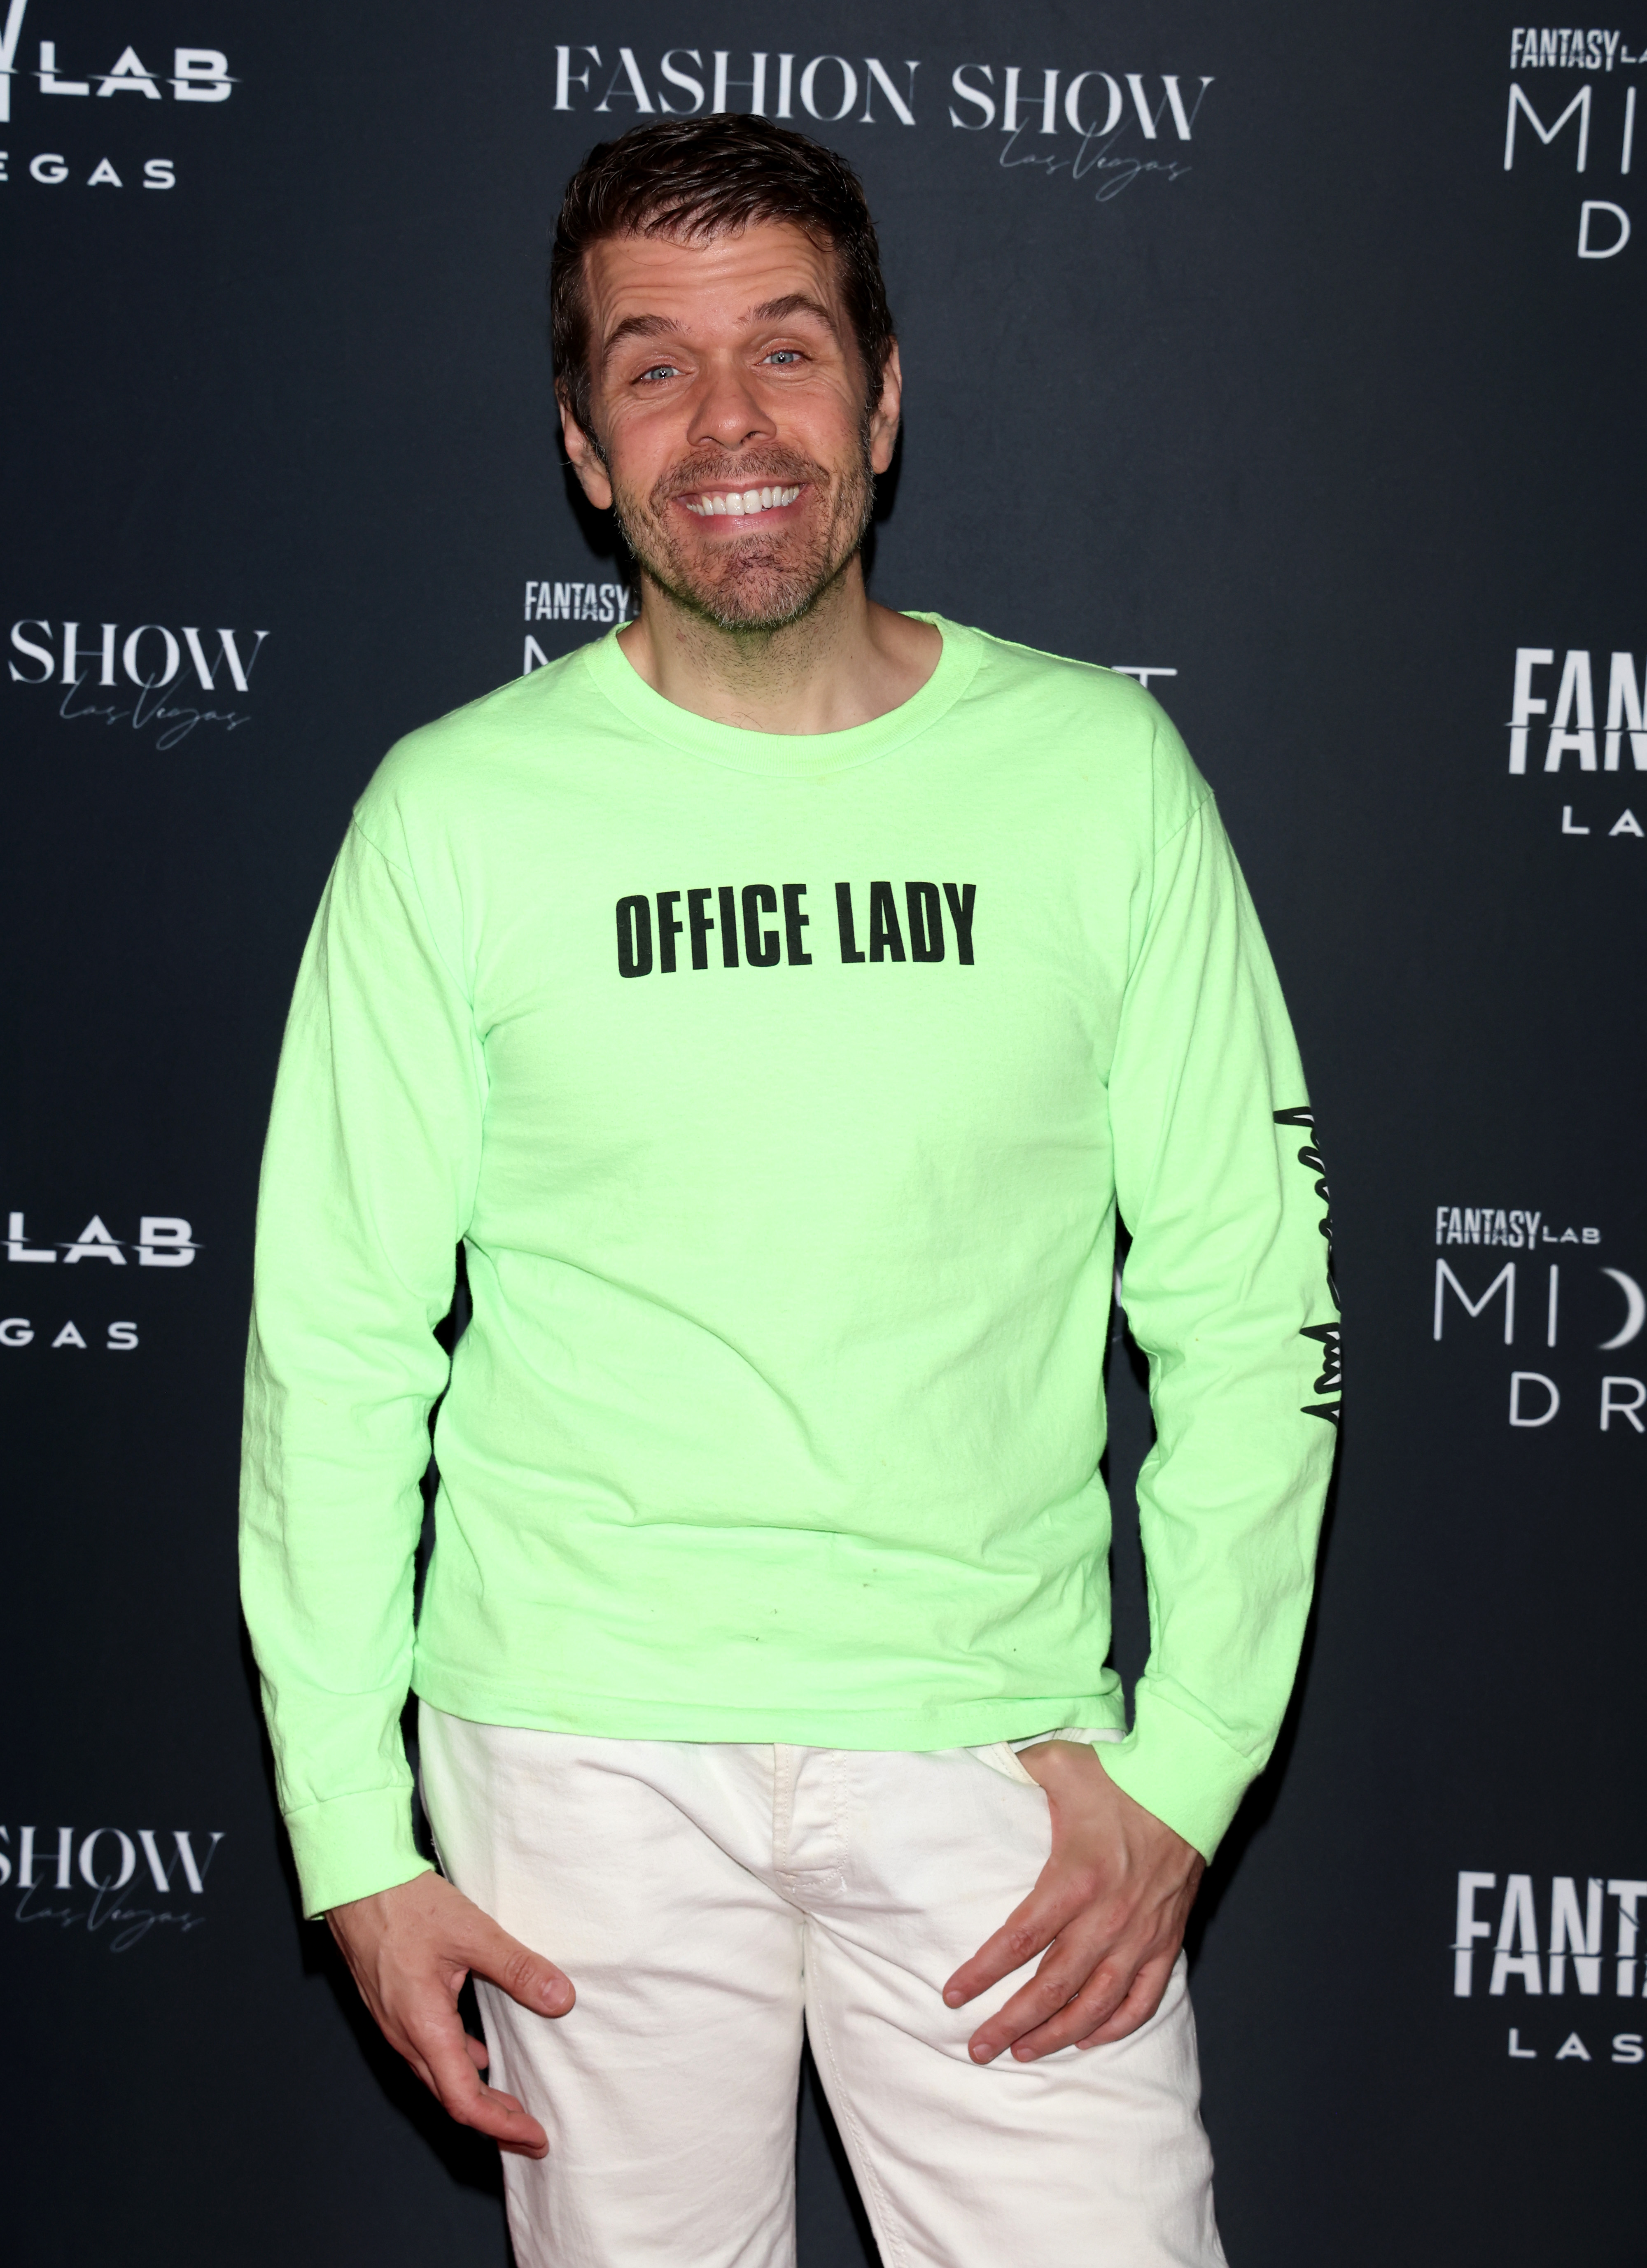 Perez Hilton attends the debut of Fantasy Lab Las Vegas' Midnight Dreams immersive experience at the Fashion Show mall on June 9, 2023, in Las Vegas, Nevada. | Source: Getty Images